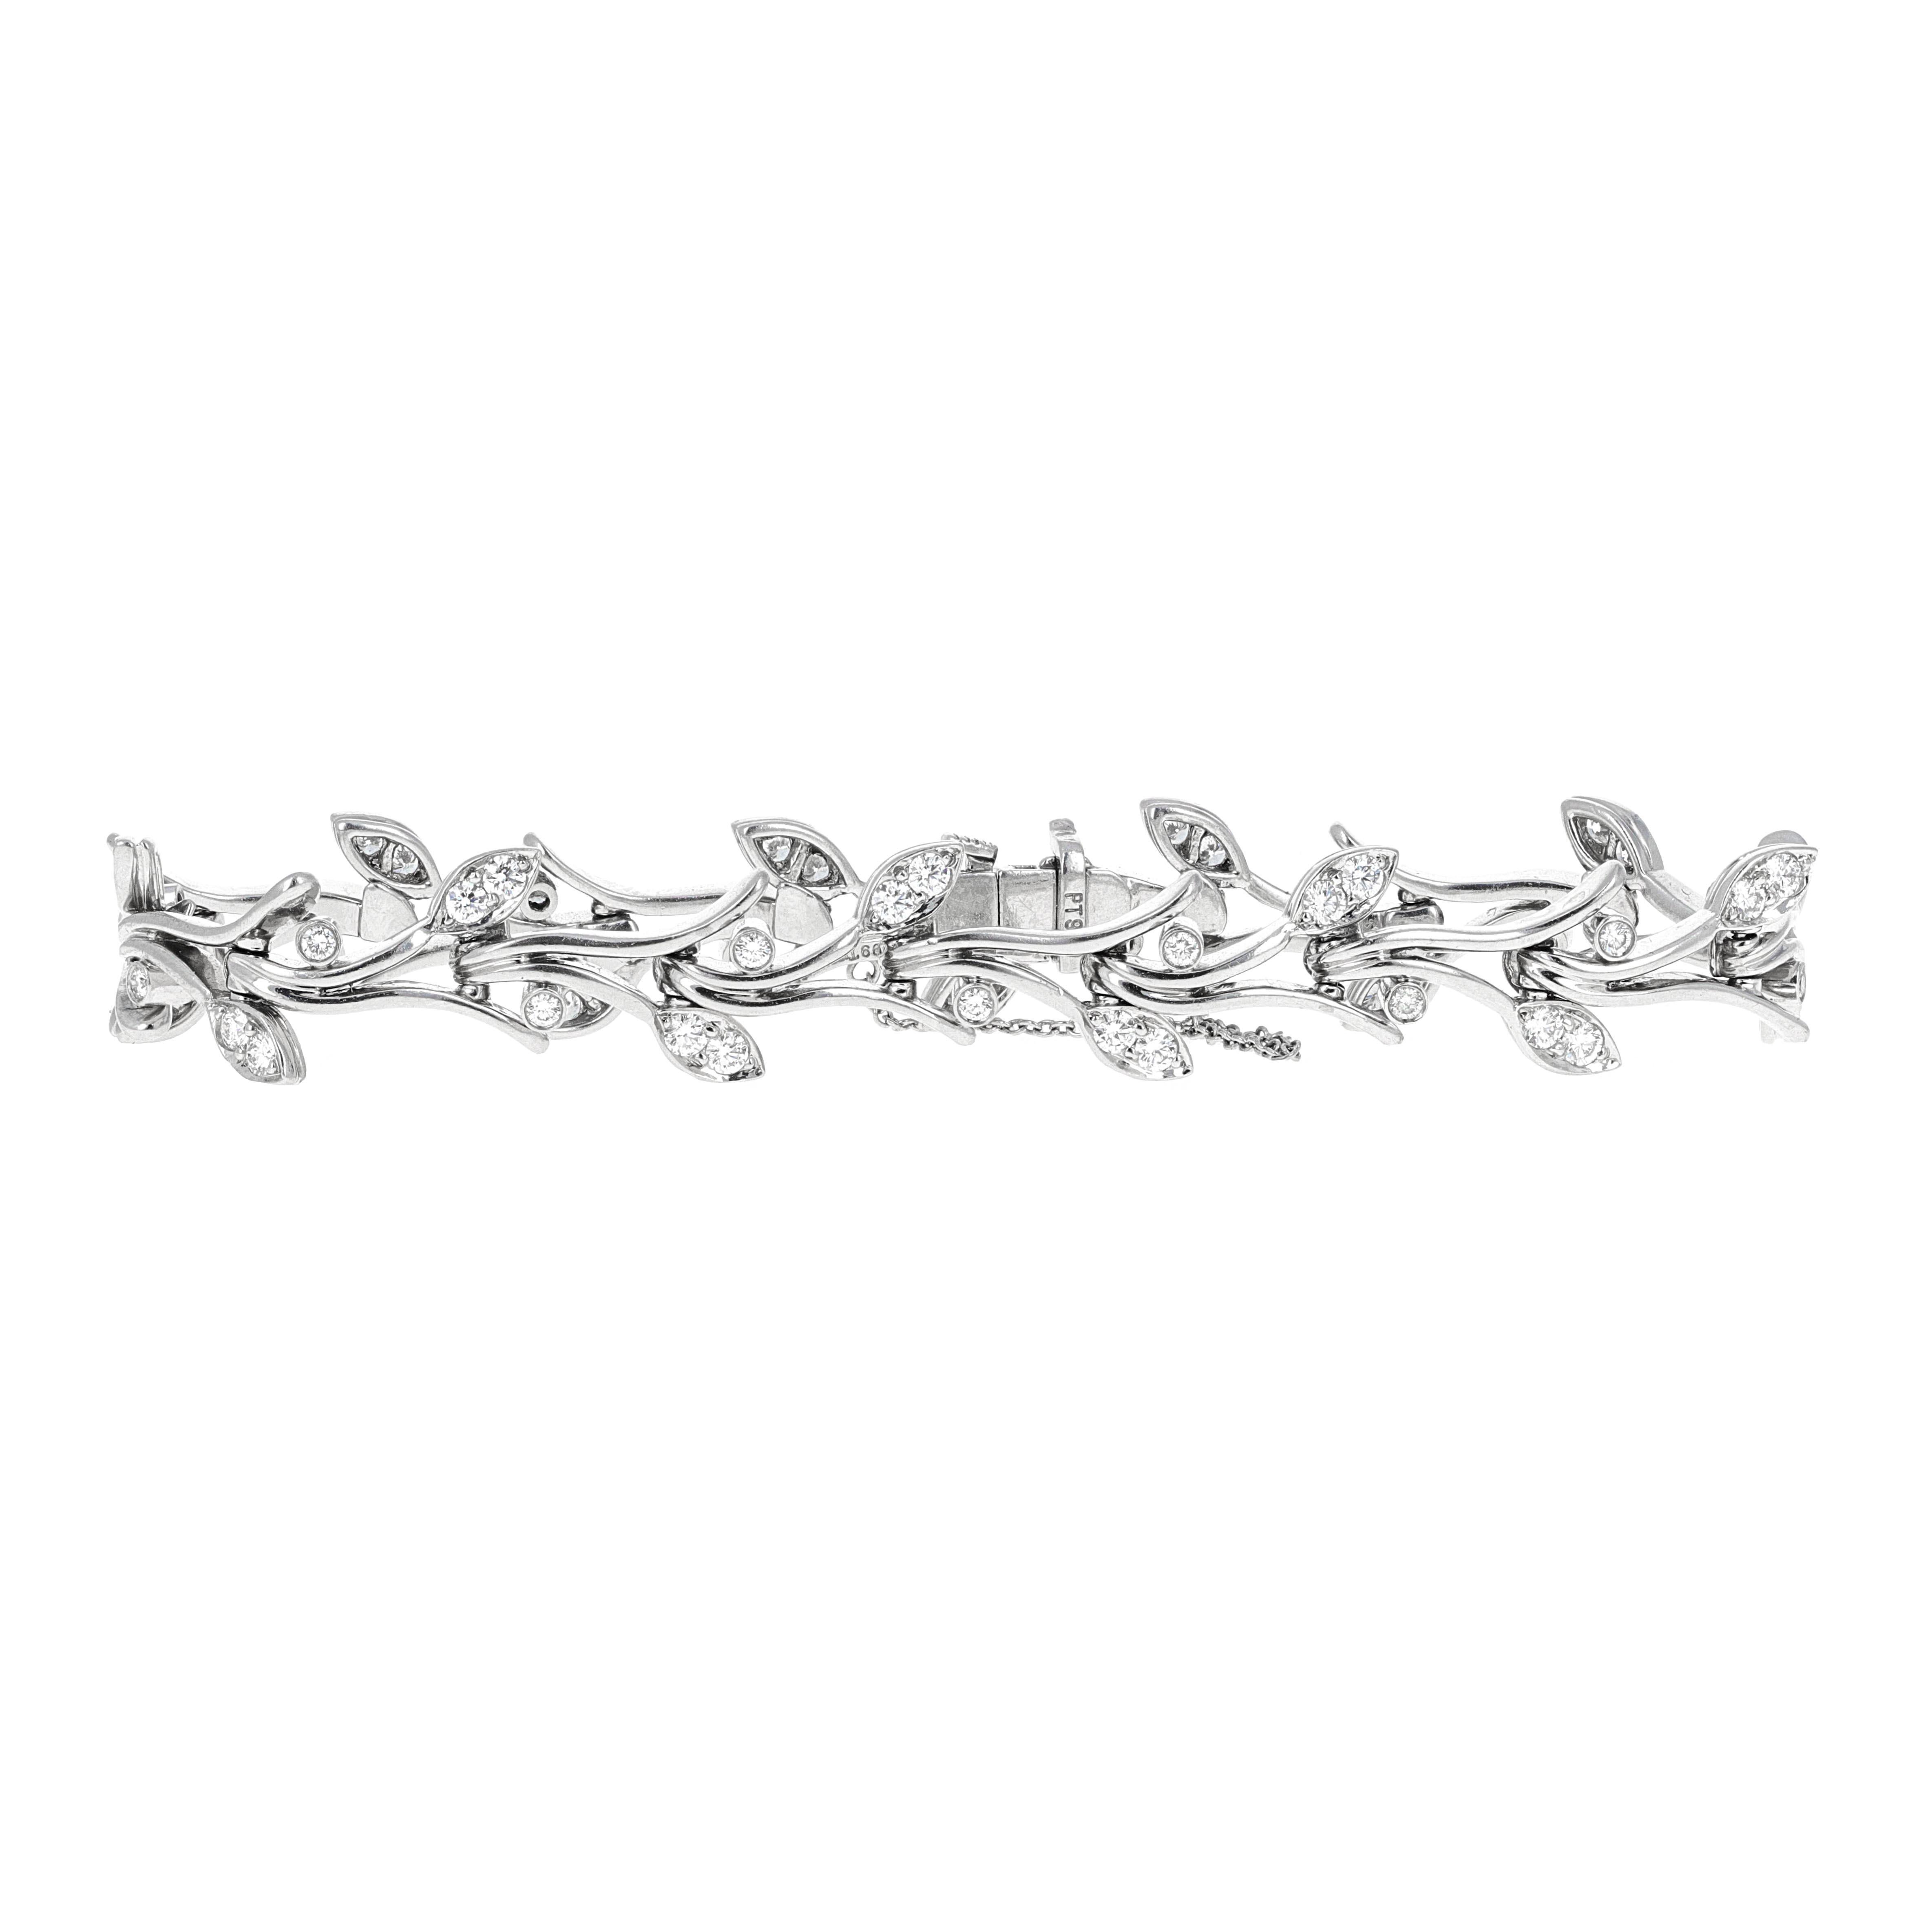 Authentic Tiffany & Co, platinum diamond leaf tennis bracelet. The bracelet has 54 round brilliant white diamonds that are eye clean. There is an estimated 1.15 carats total weight in diamonds. The bracelet measures 7 inches and has a saftey chain